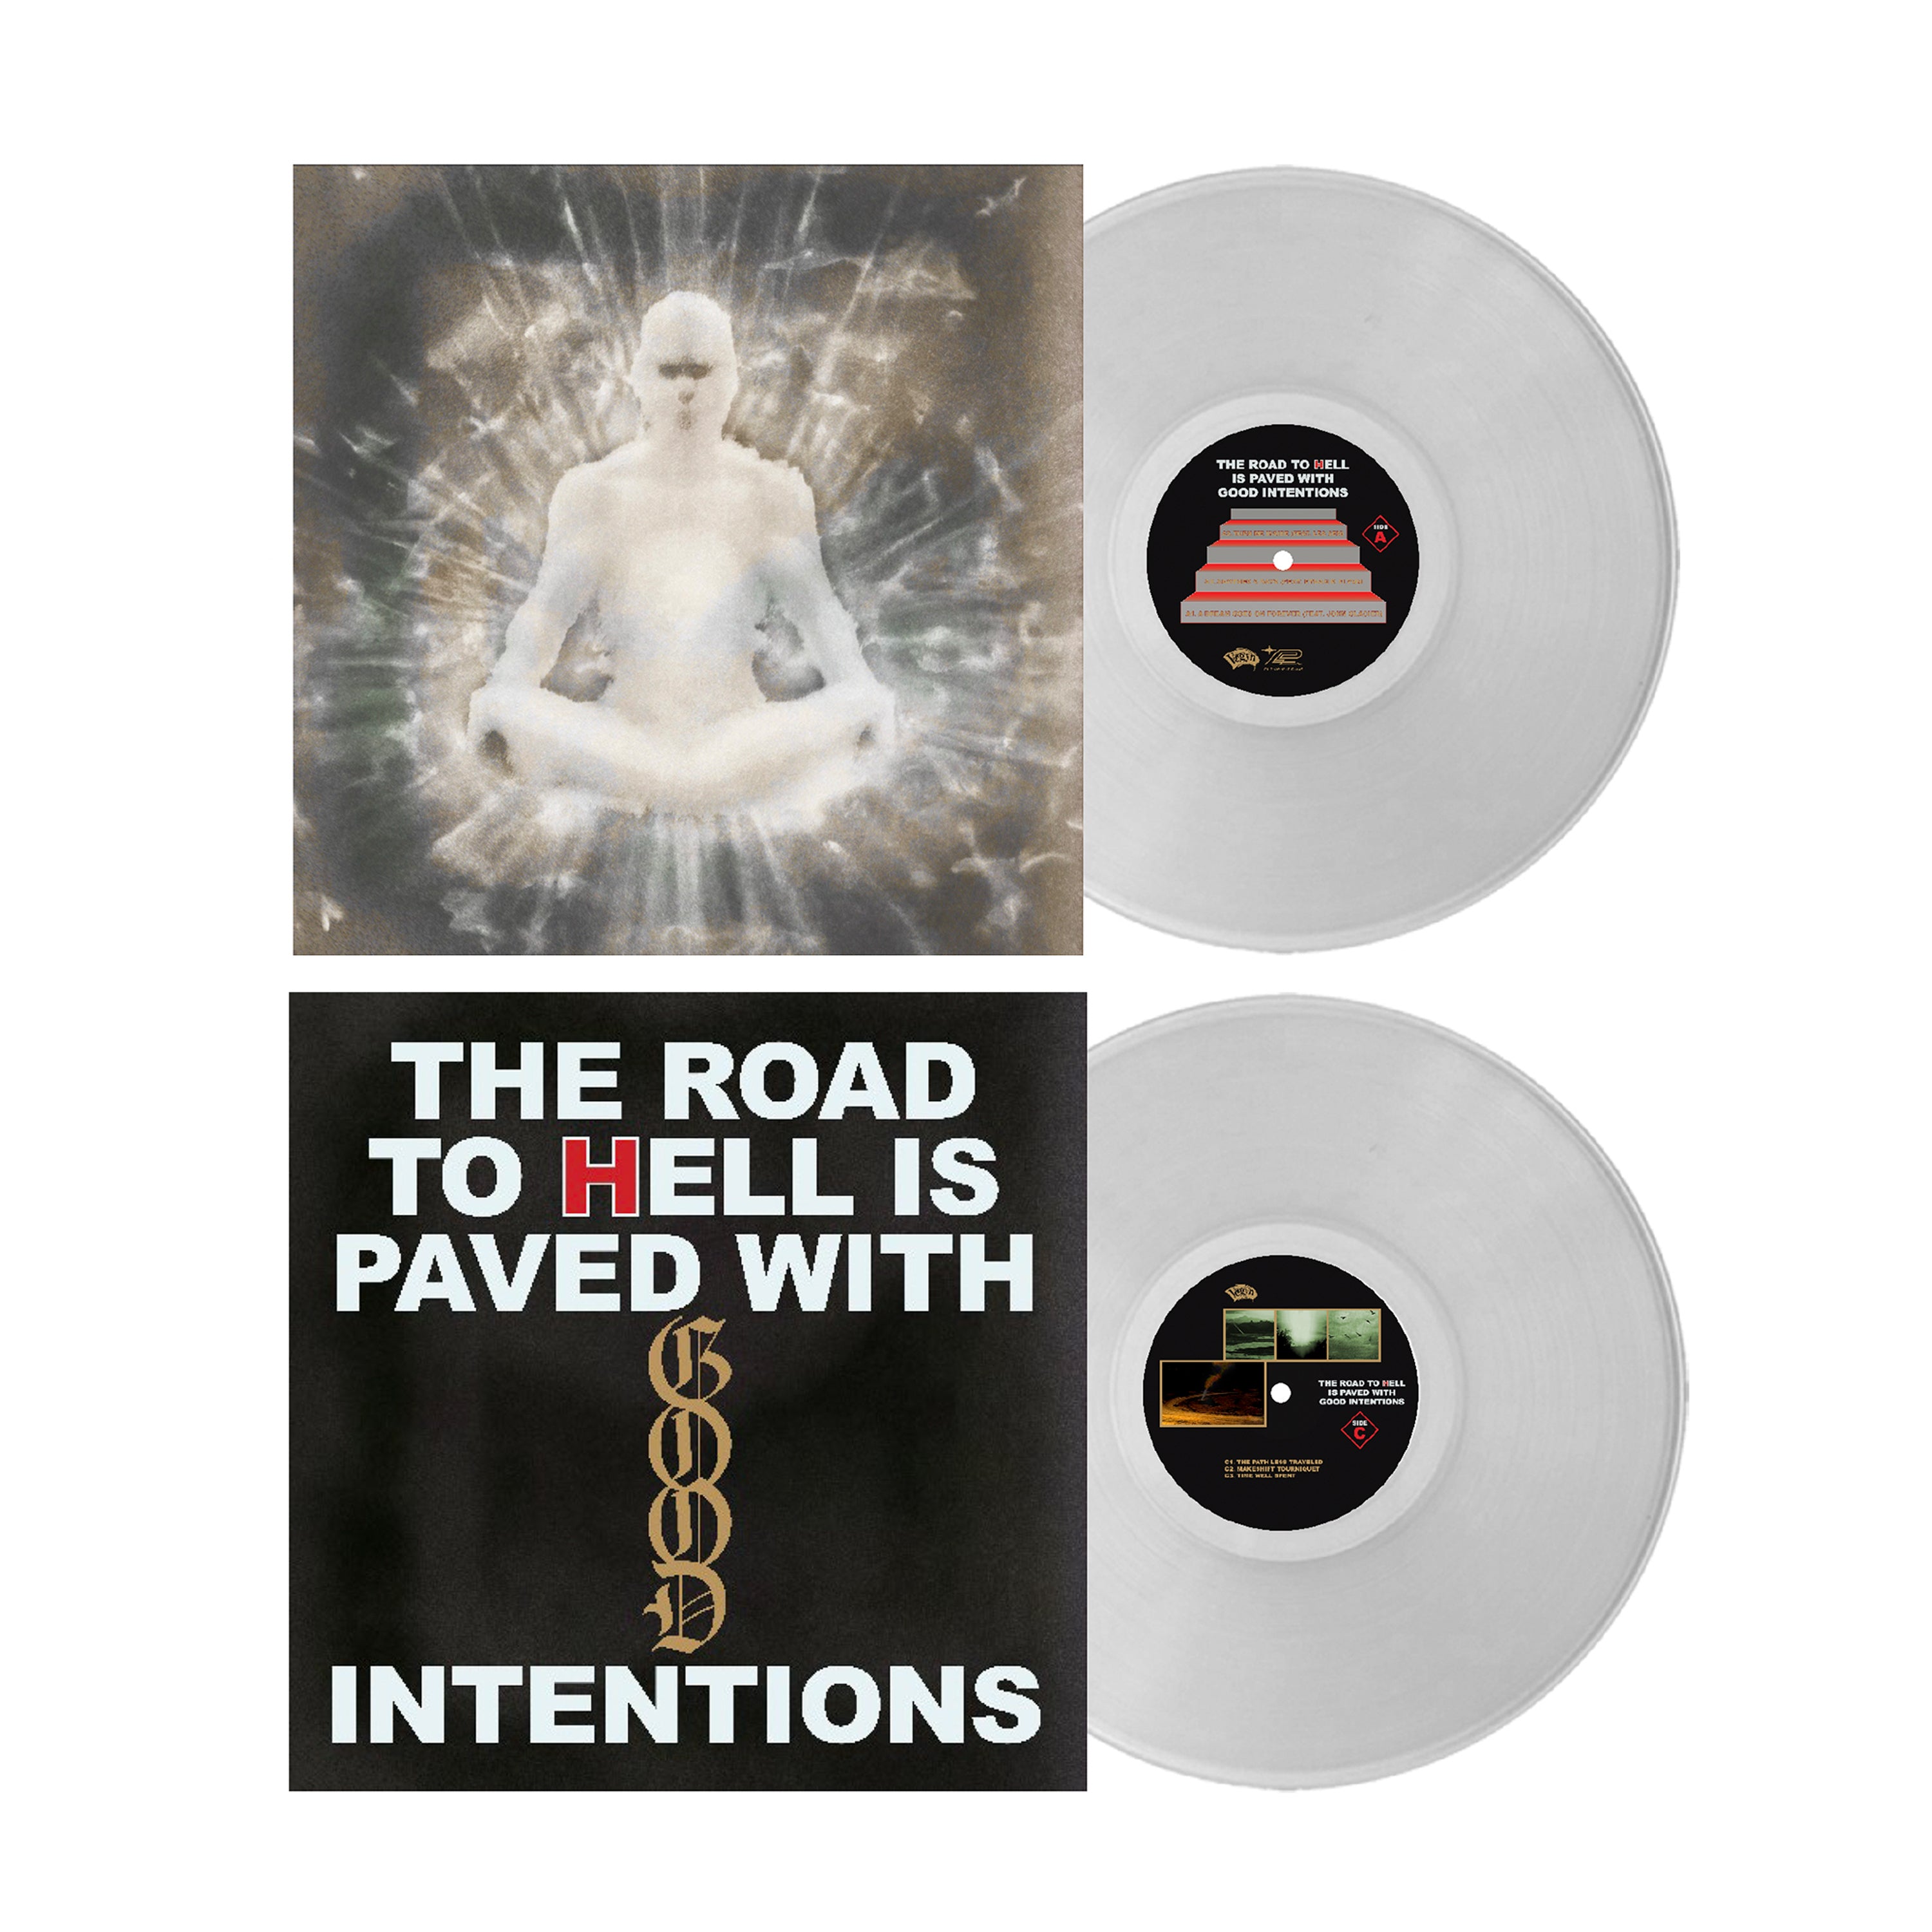 Vegyn - The Road To Hell Is Paved With Good Intentions Special Edition 12" Vinyl